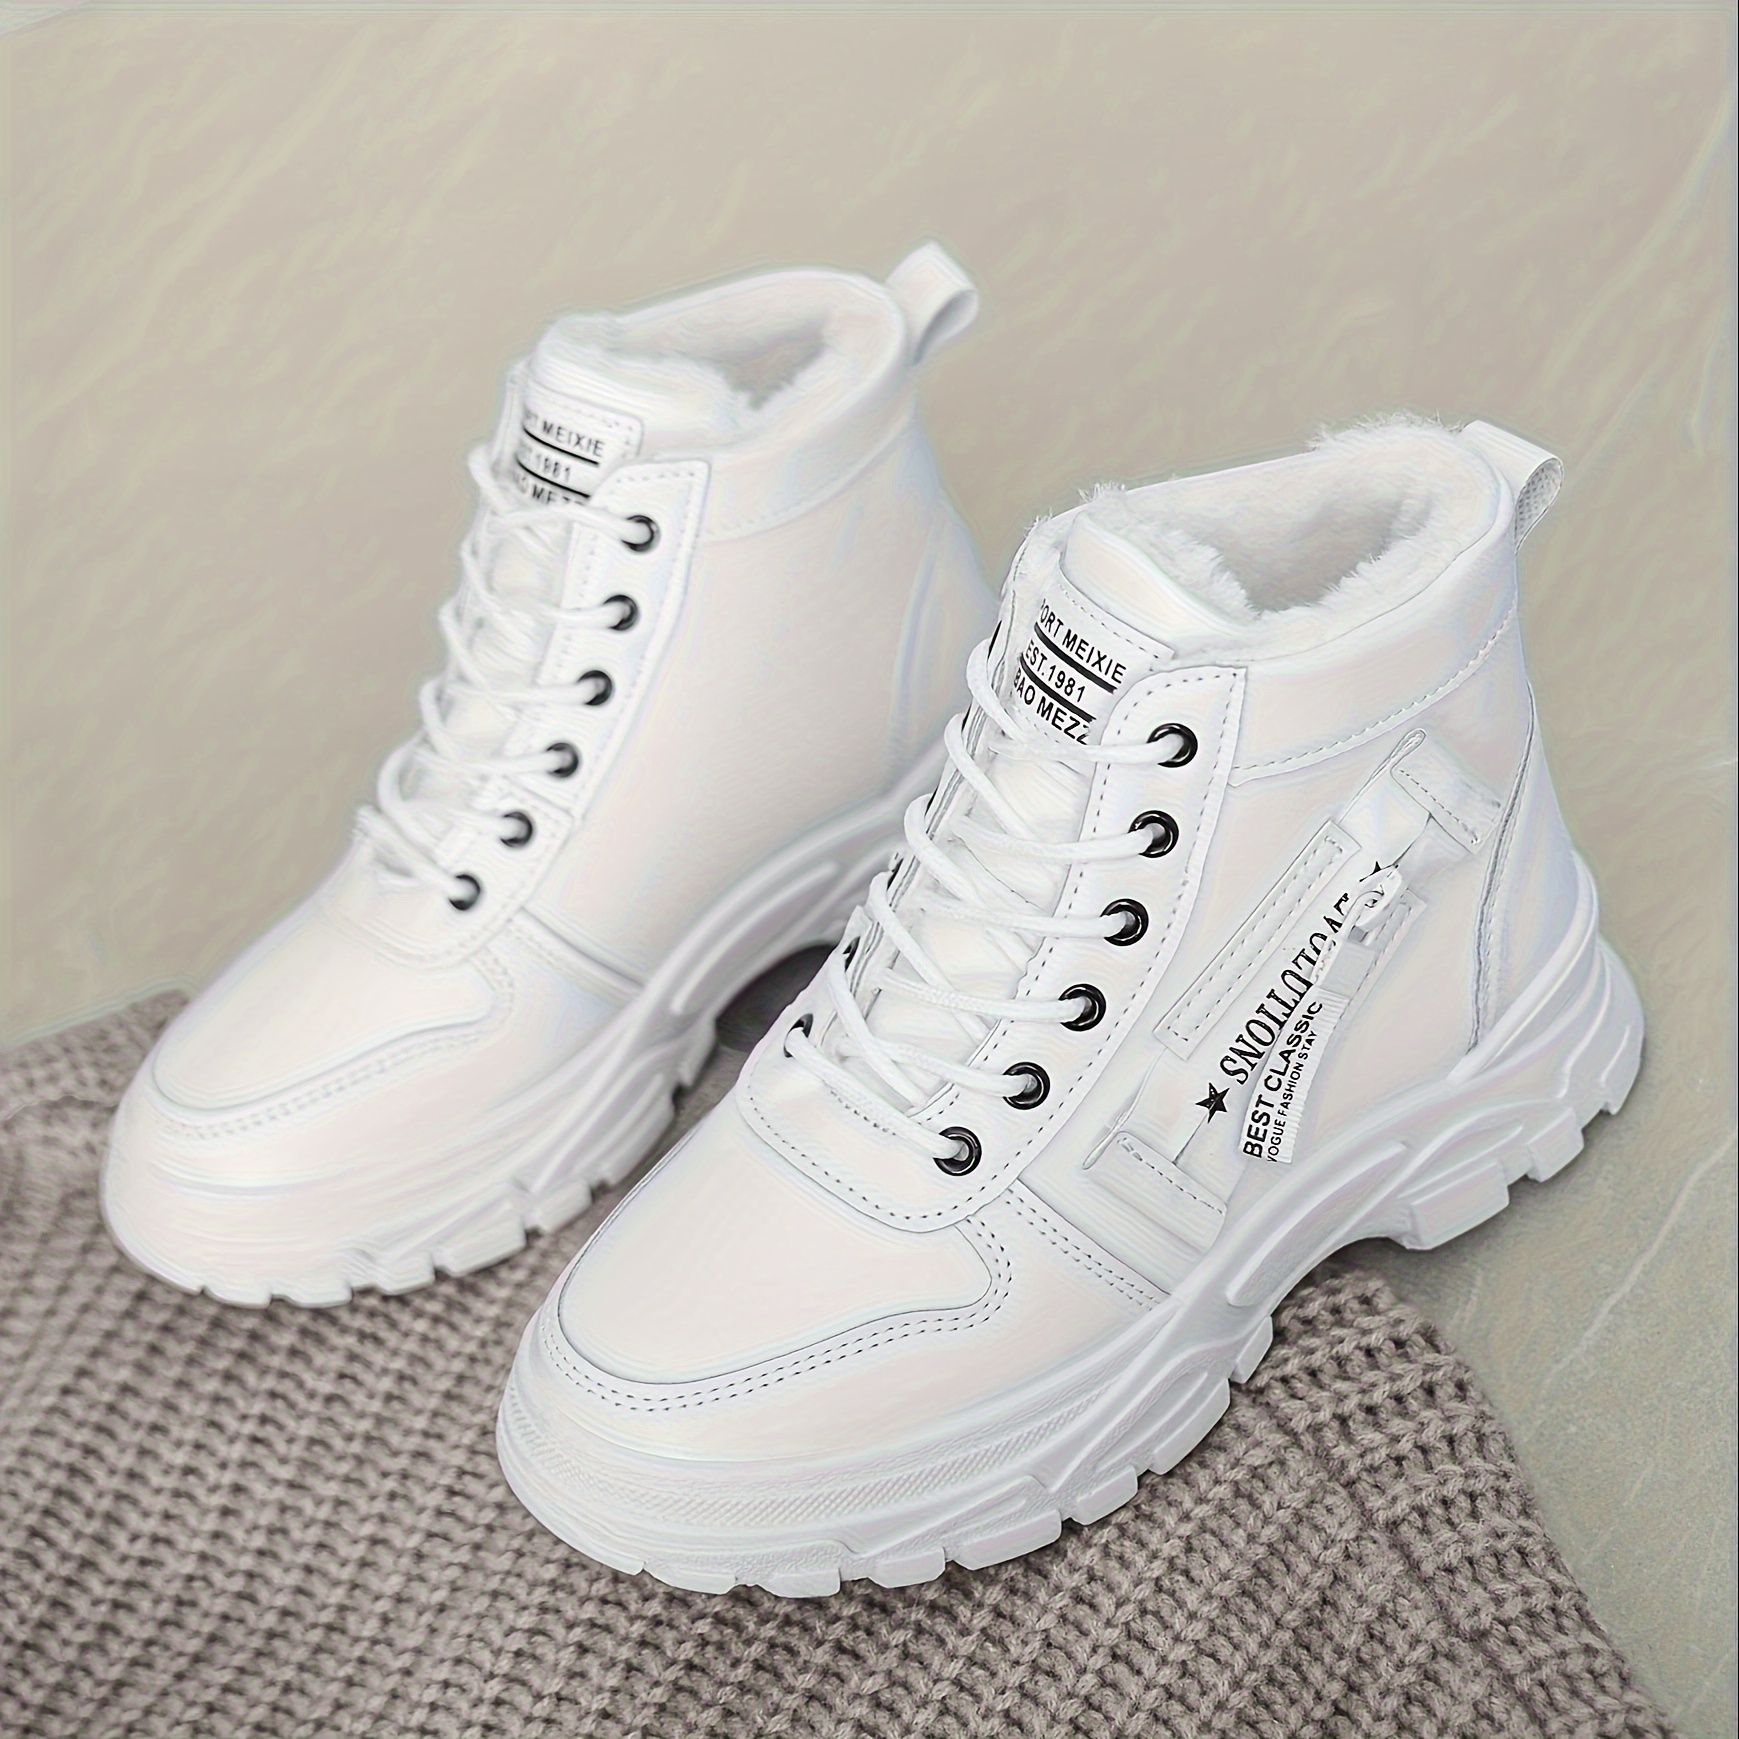 womens plush lined sneakers winter warm lace up high top ankle boots thermal outdoor shoes details 1